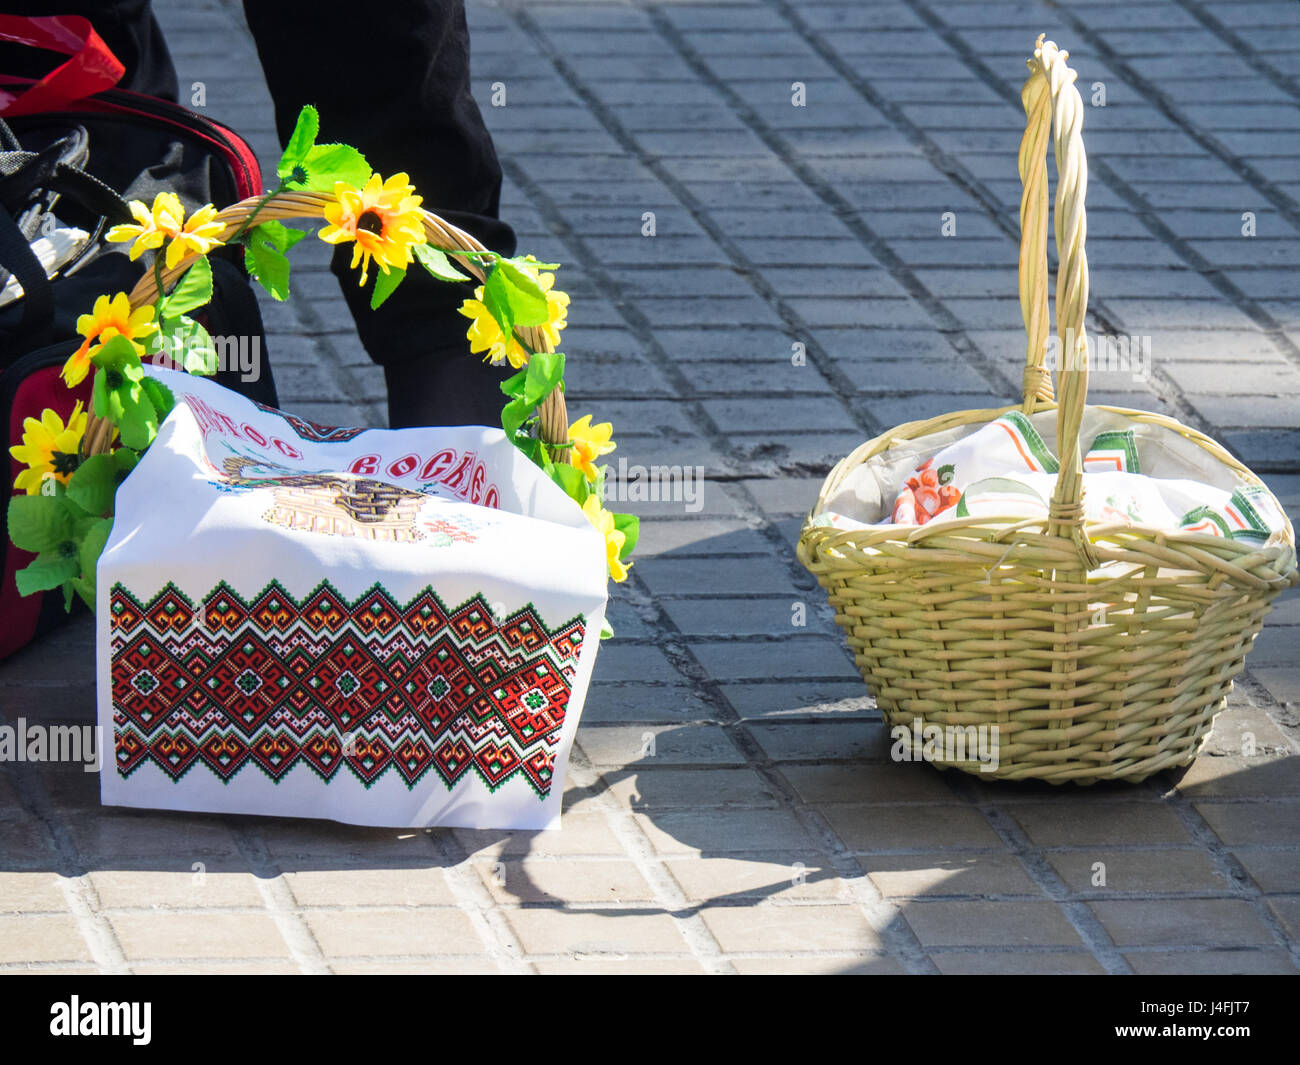 Cane baskets covered with embroidered napkins with Easter offerings of eggs and cakes to celebrate the Russian Orthodox Easter. Stock Photo